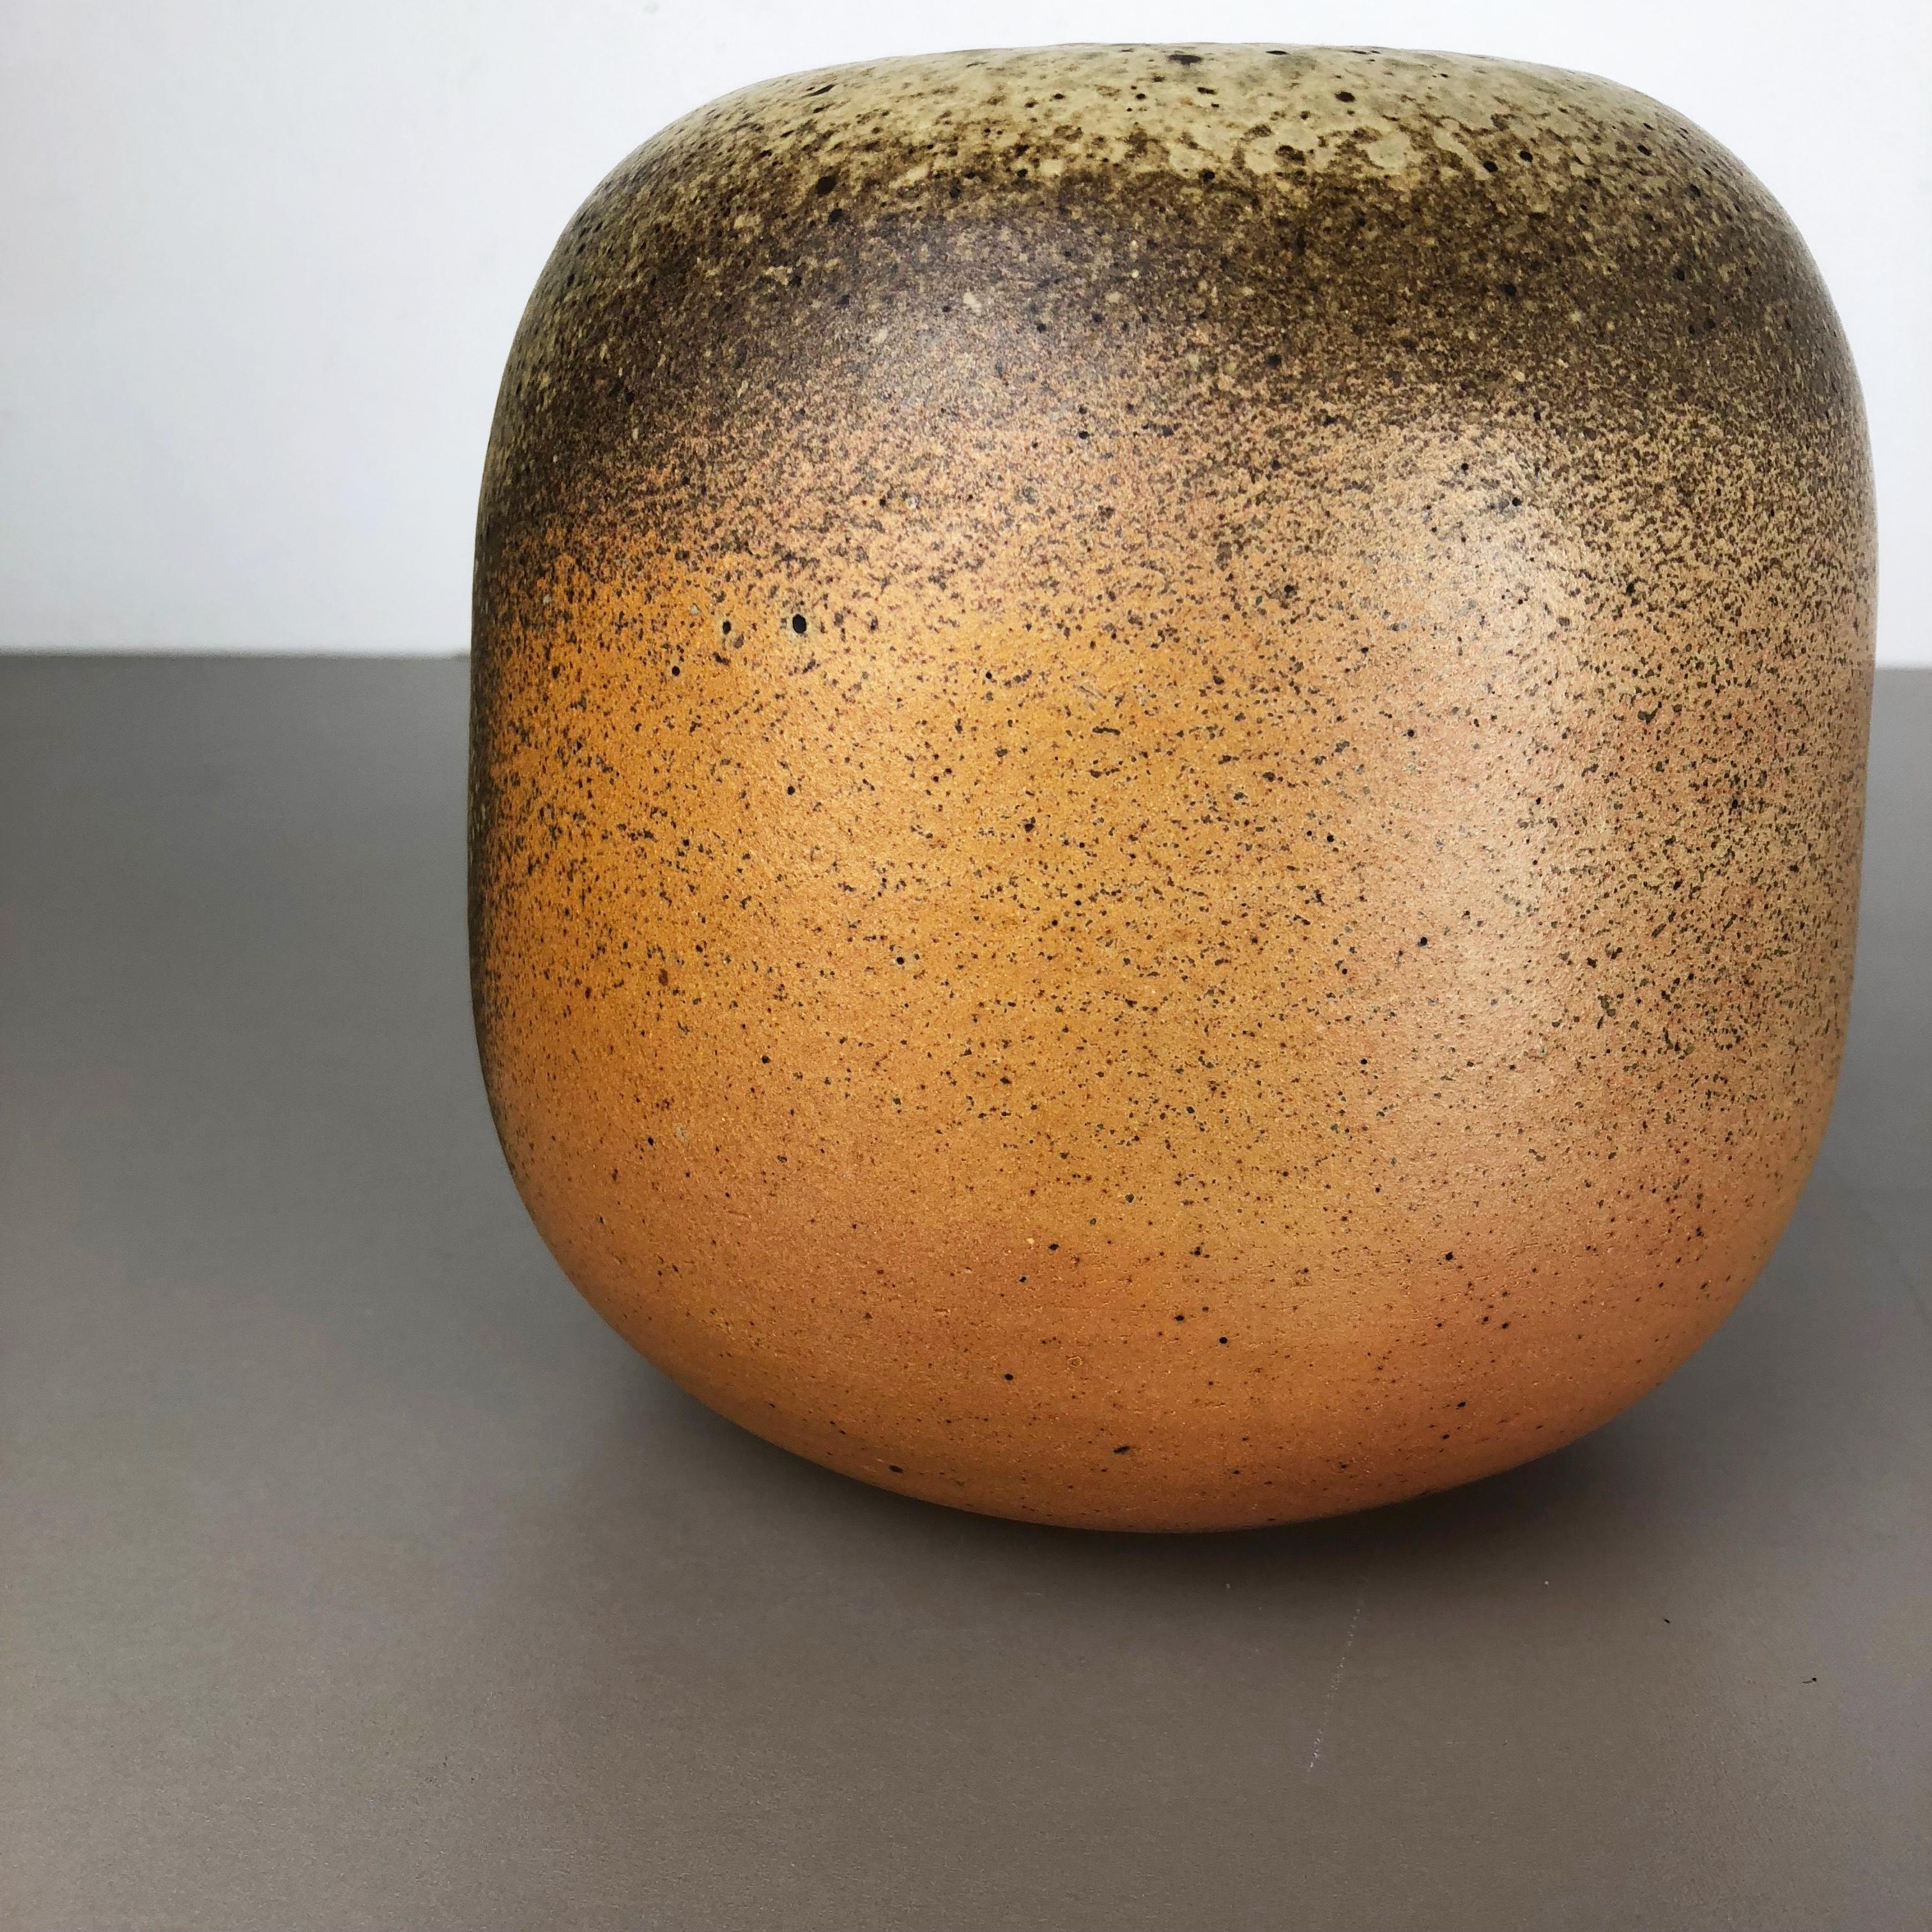 20th Century Abstract Ceramic Studio Pottery Vase Object Horst Kerstan, Kandern Germany 1980s For Sale